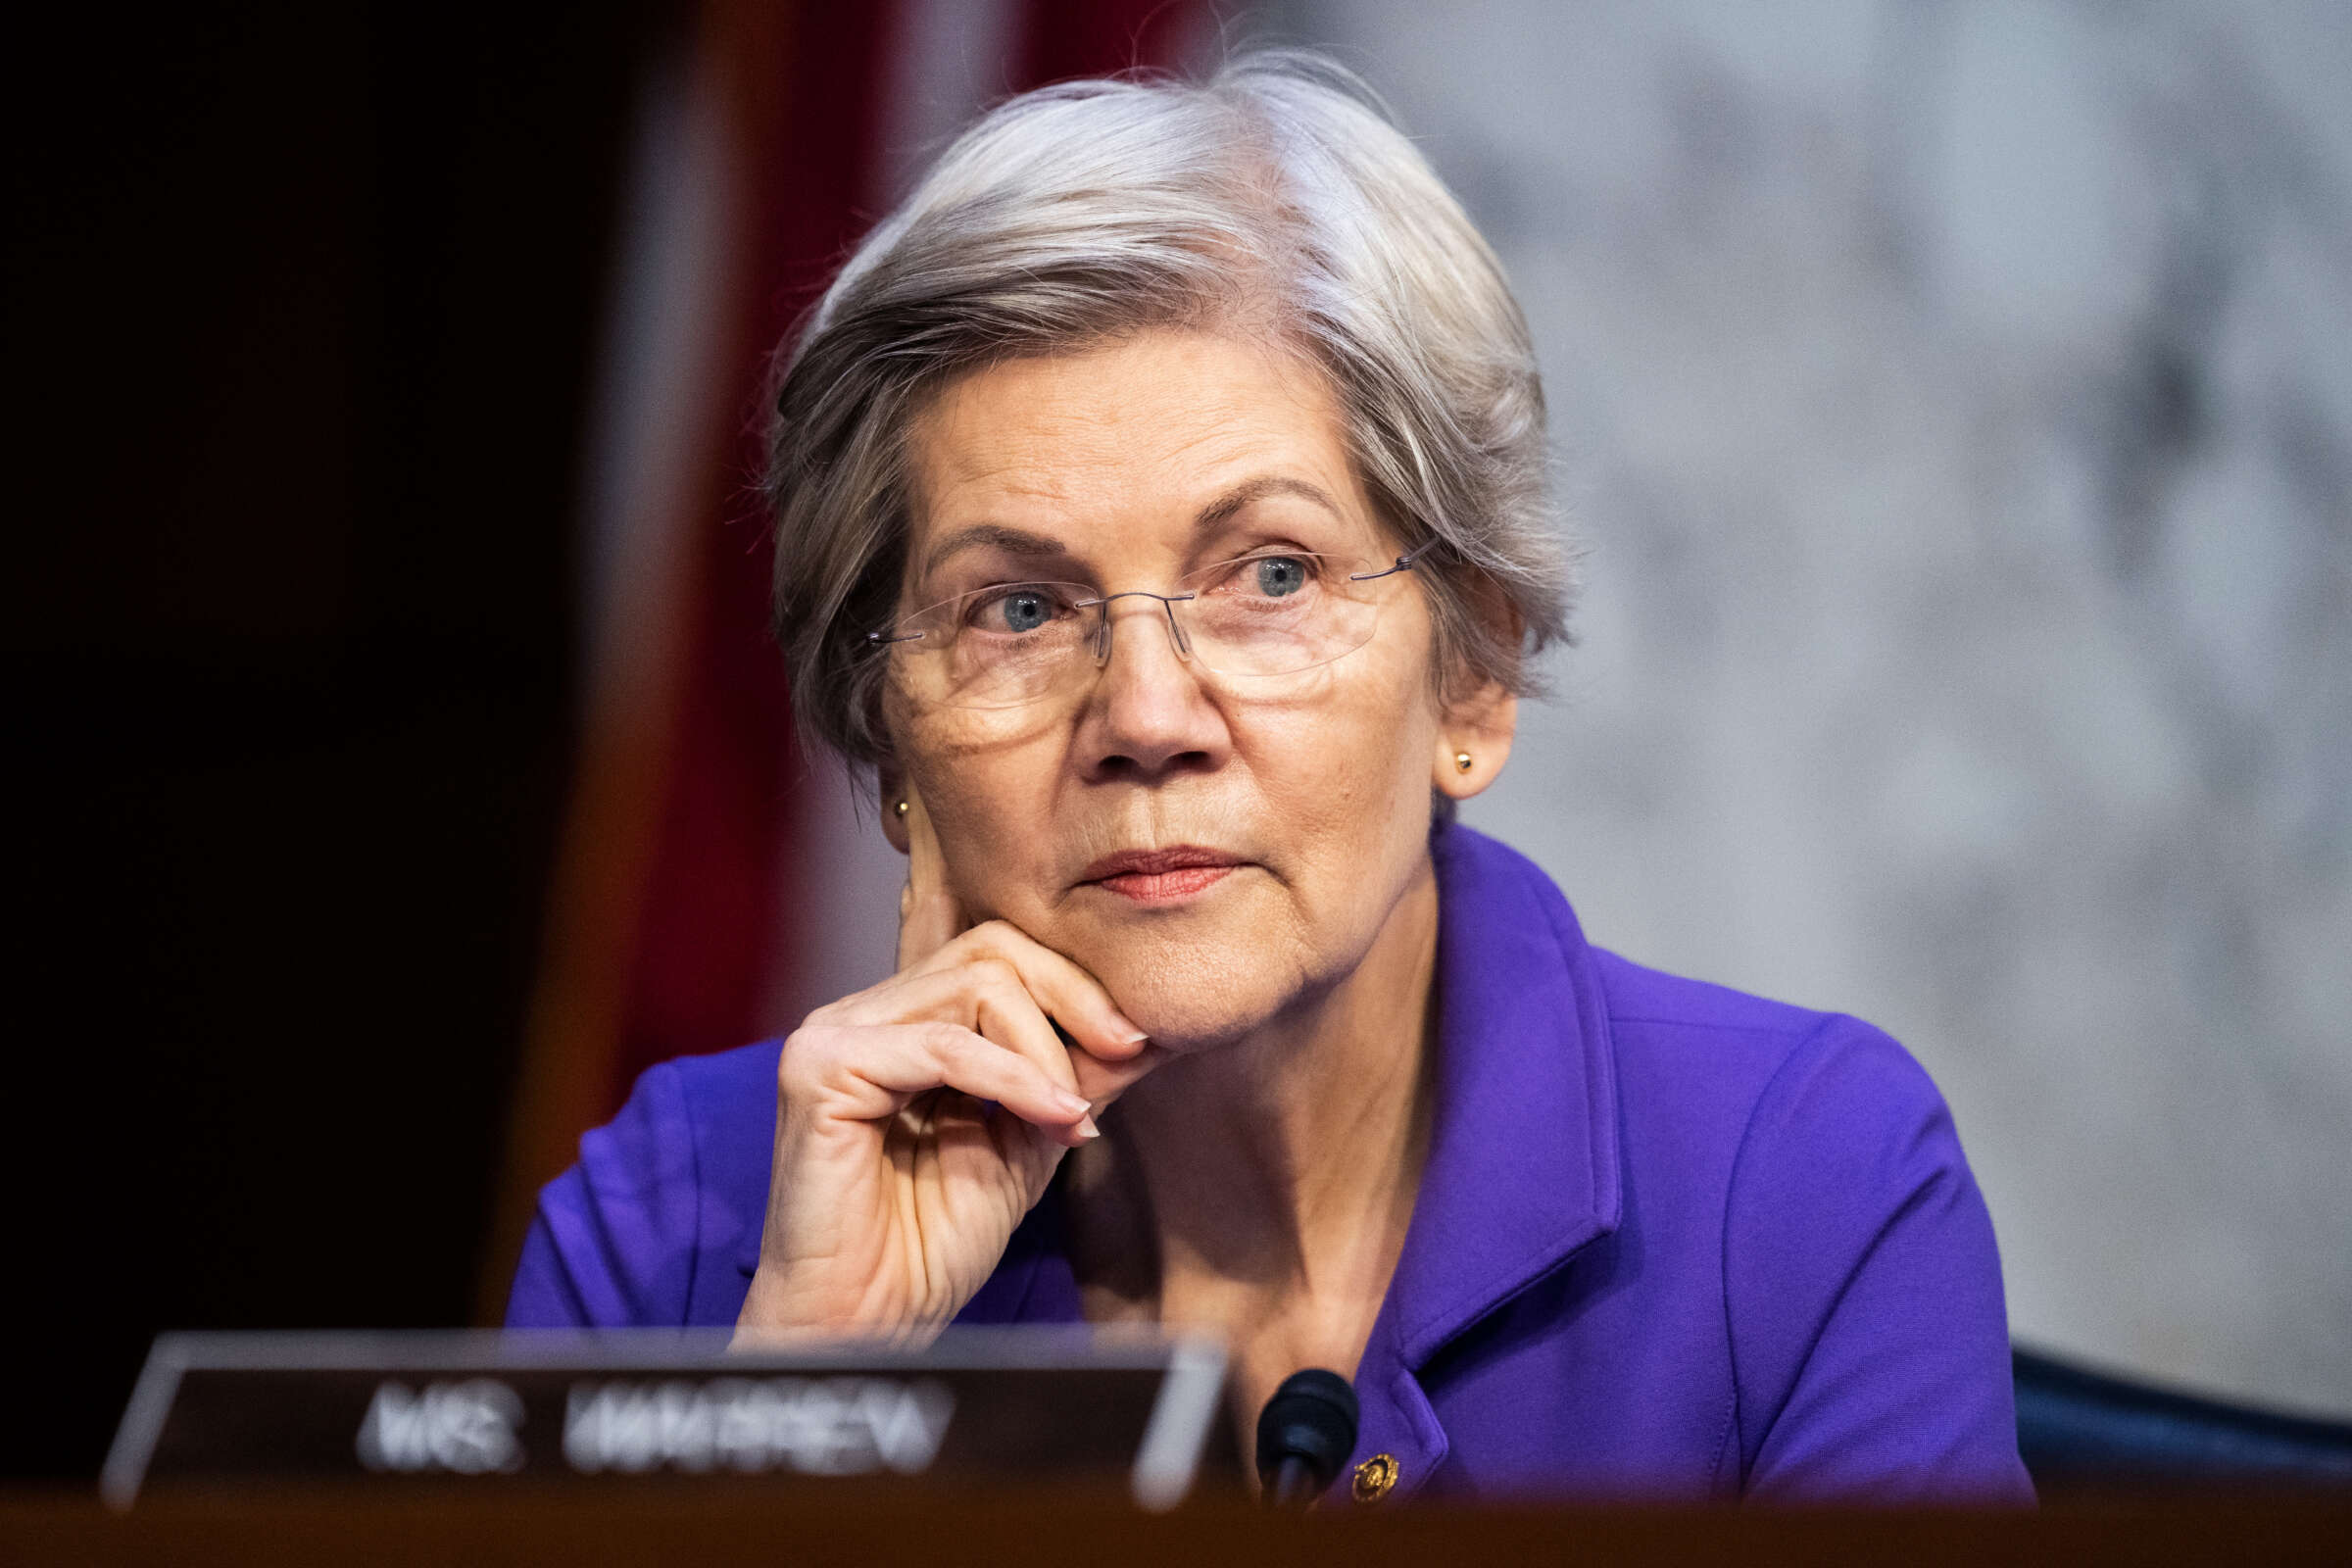 Warren Introduces Bill to Repeal 2018 Dodd-Frank Rollback in Wake of Bank Crisis (truthout.org)